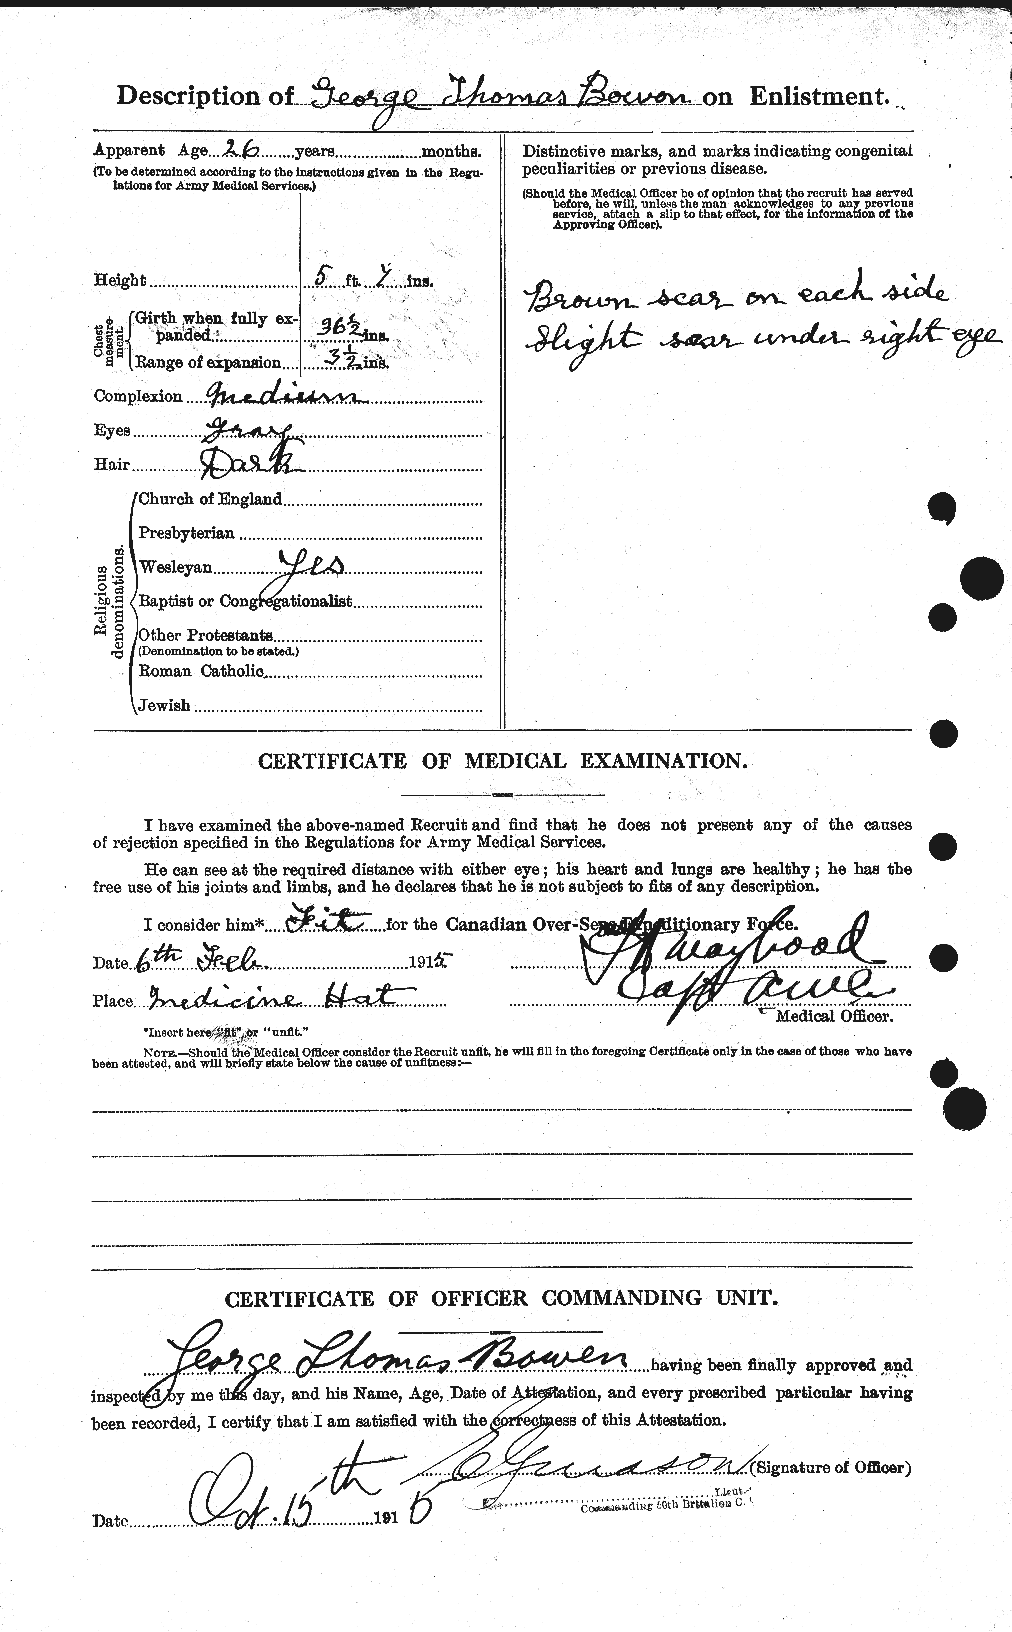 Personnel Records of the First World War - CEF 255403b